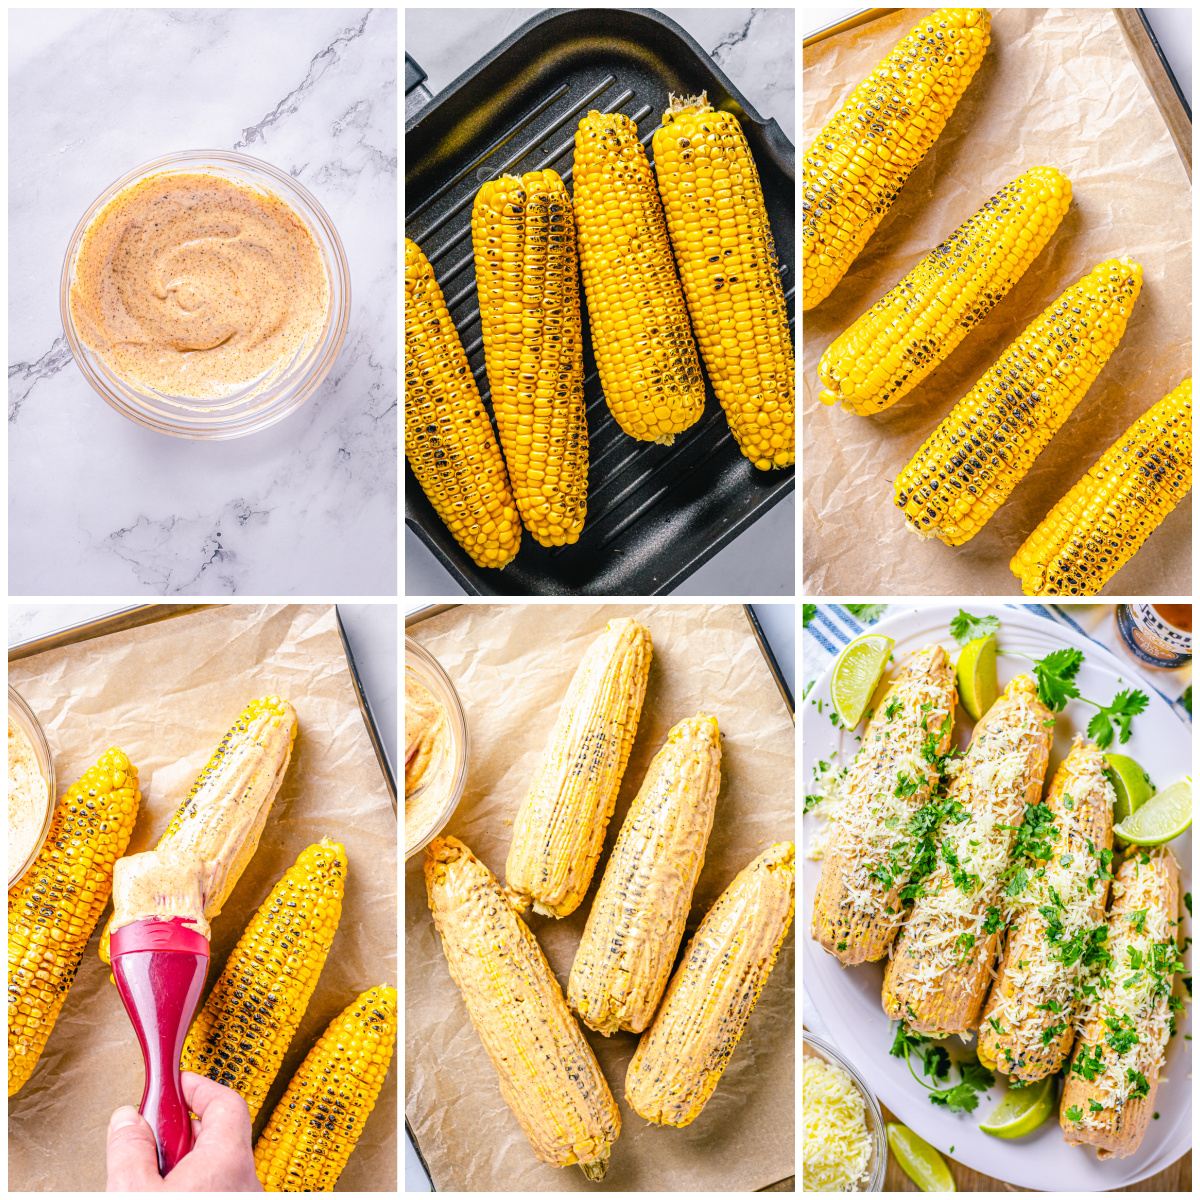 Step by step photos on how to make a Mexican Street Corn Recipe